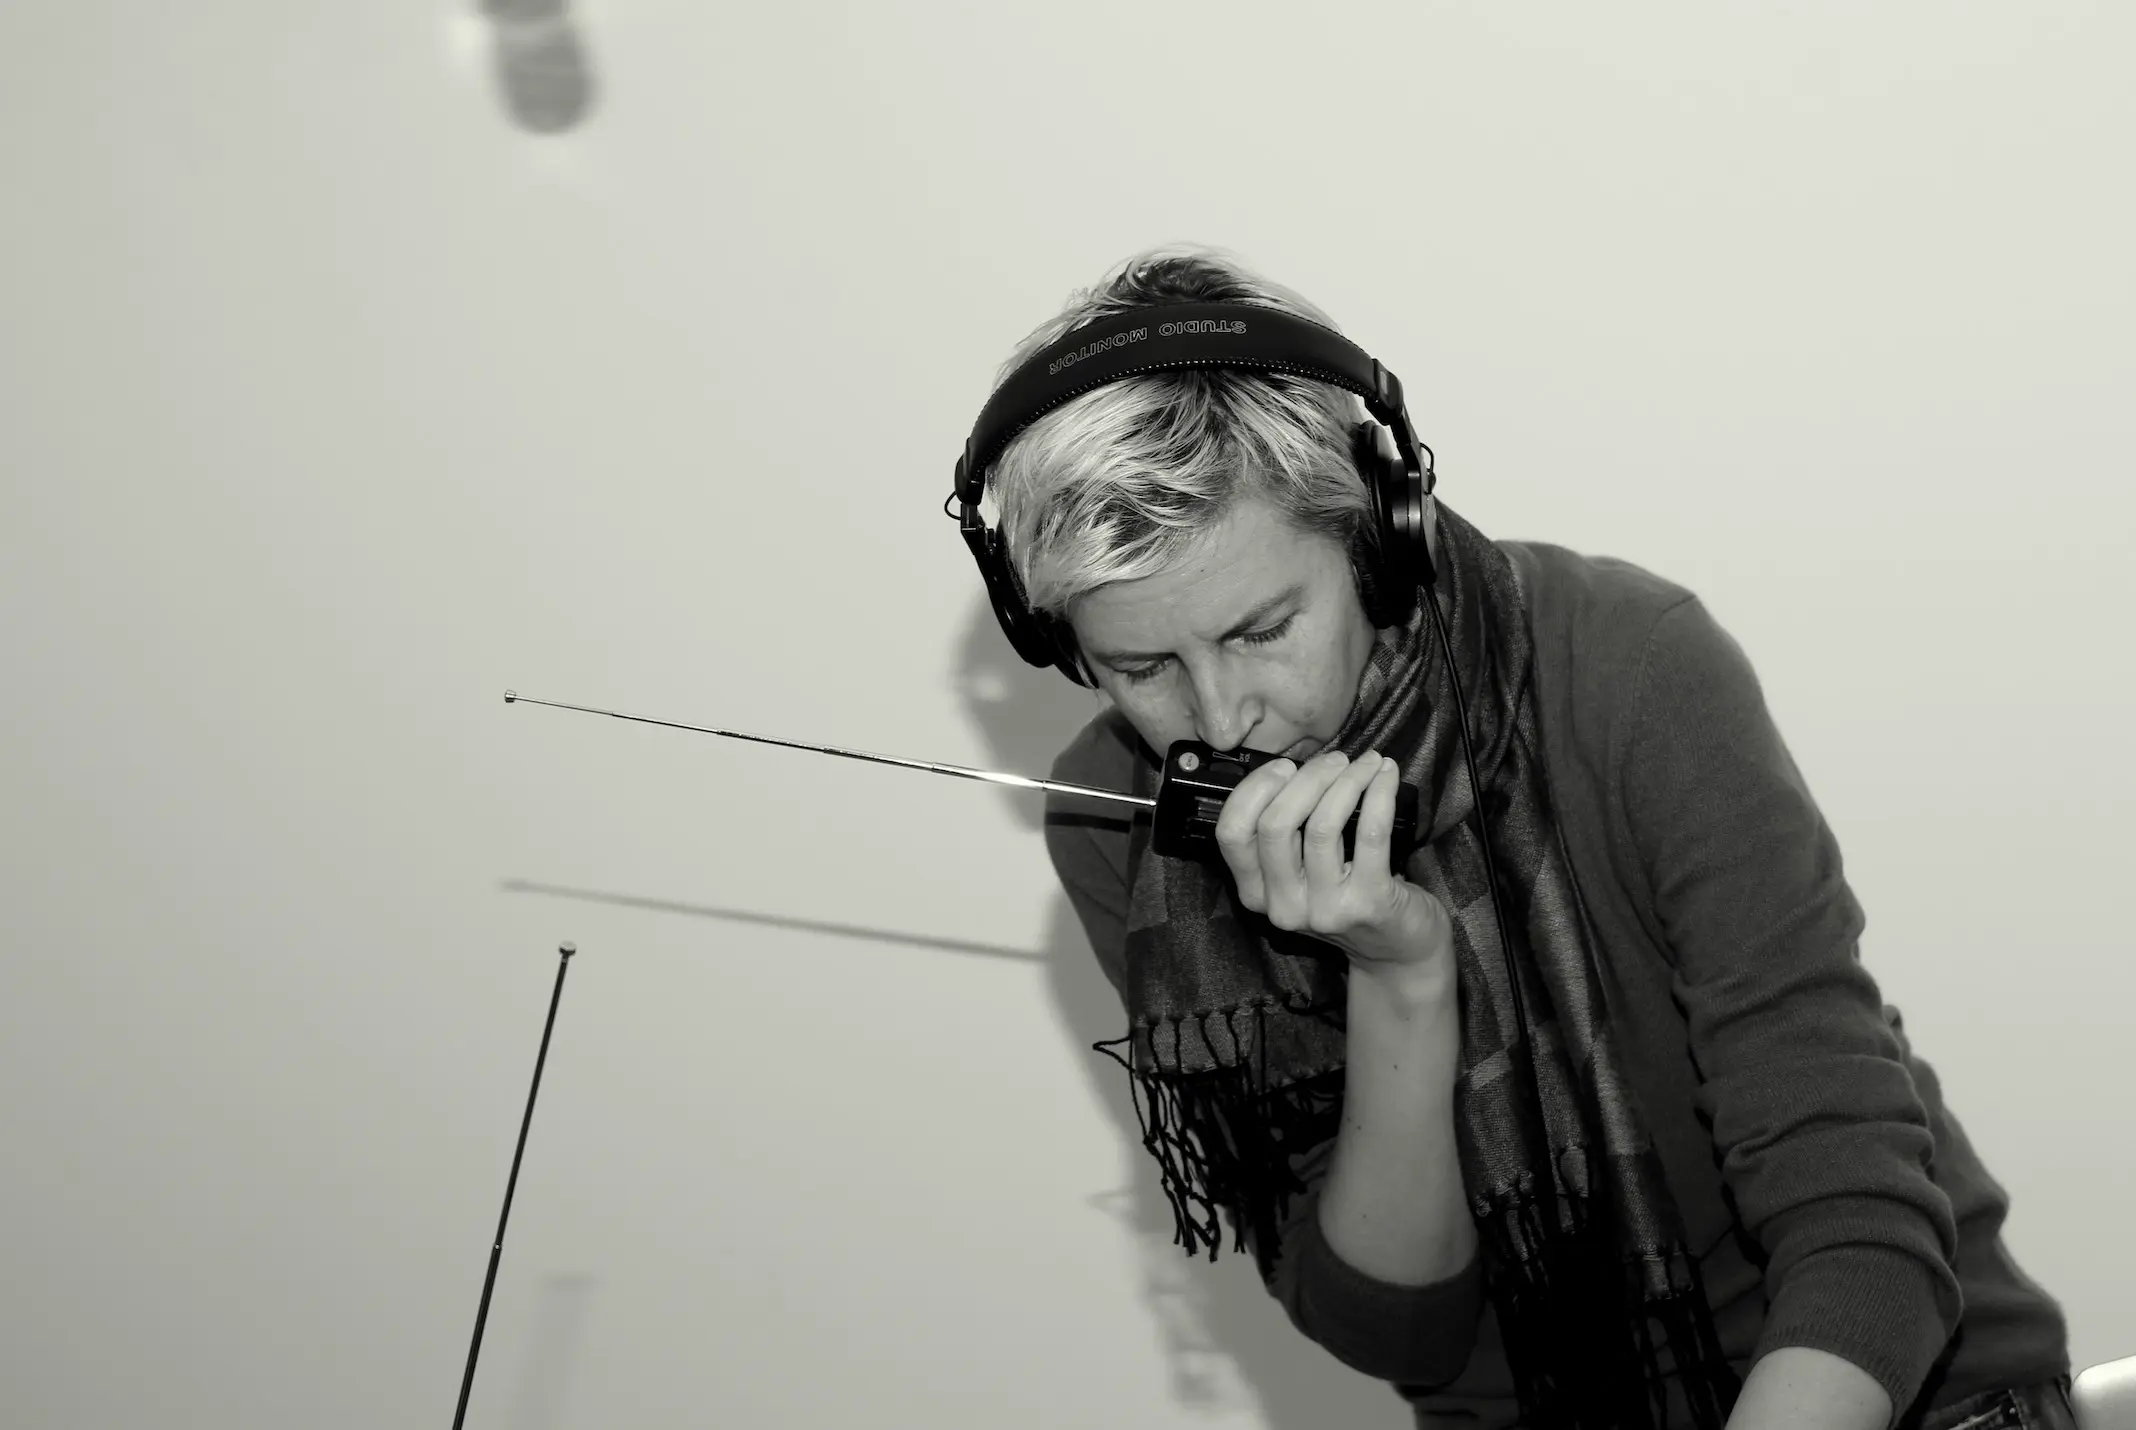 Photo of Anna Friz in headphones and speaking into walkie talkie with a long antenna